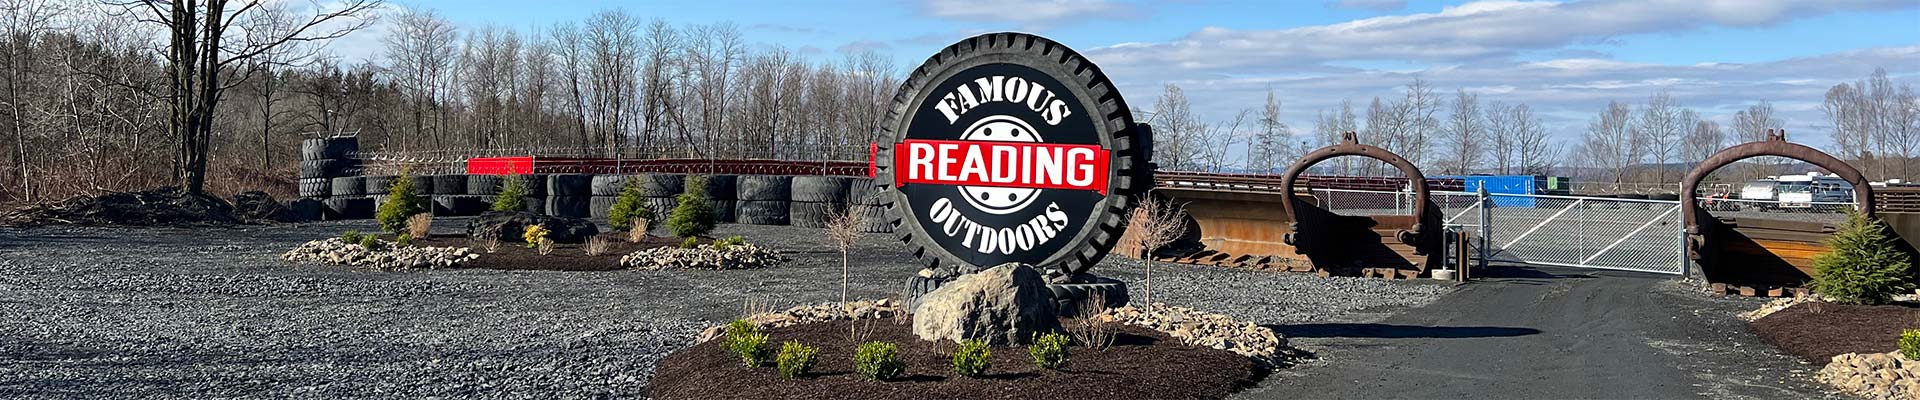 Famous Reading Outdoors Welcome Sign